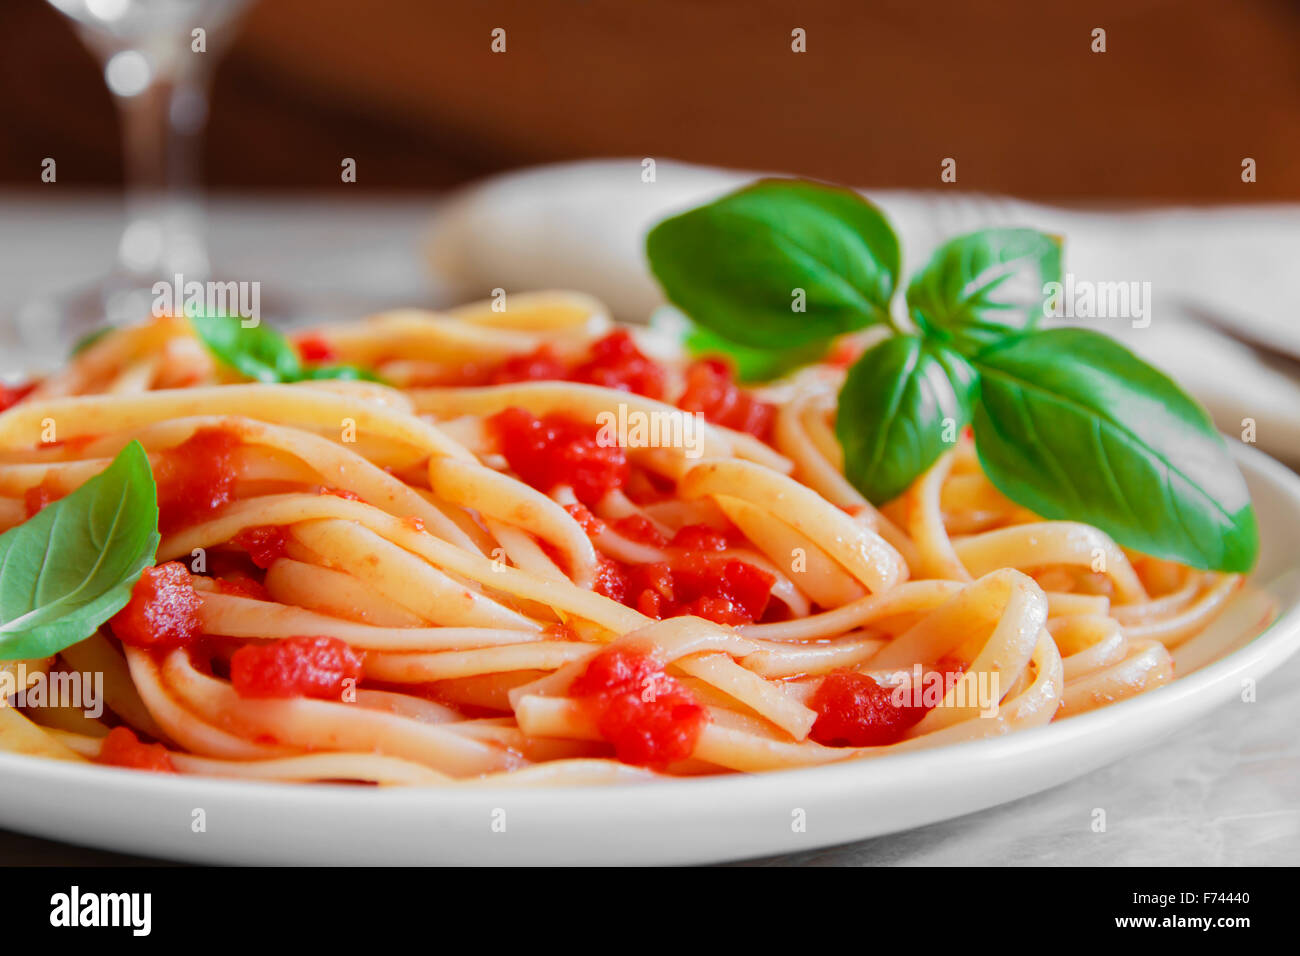 Linguine pasta in tomato sauce on a plate Stock Photo